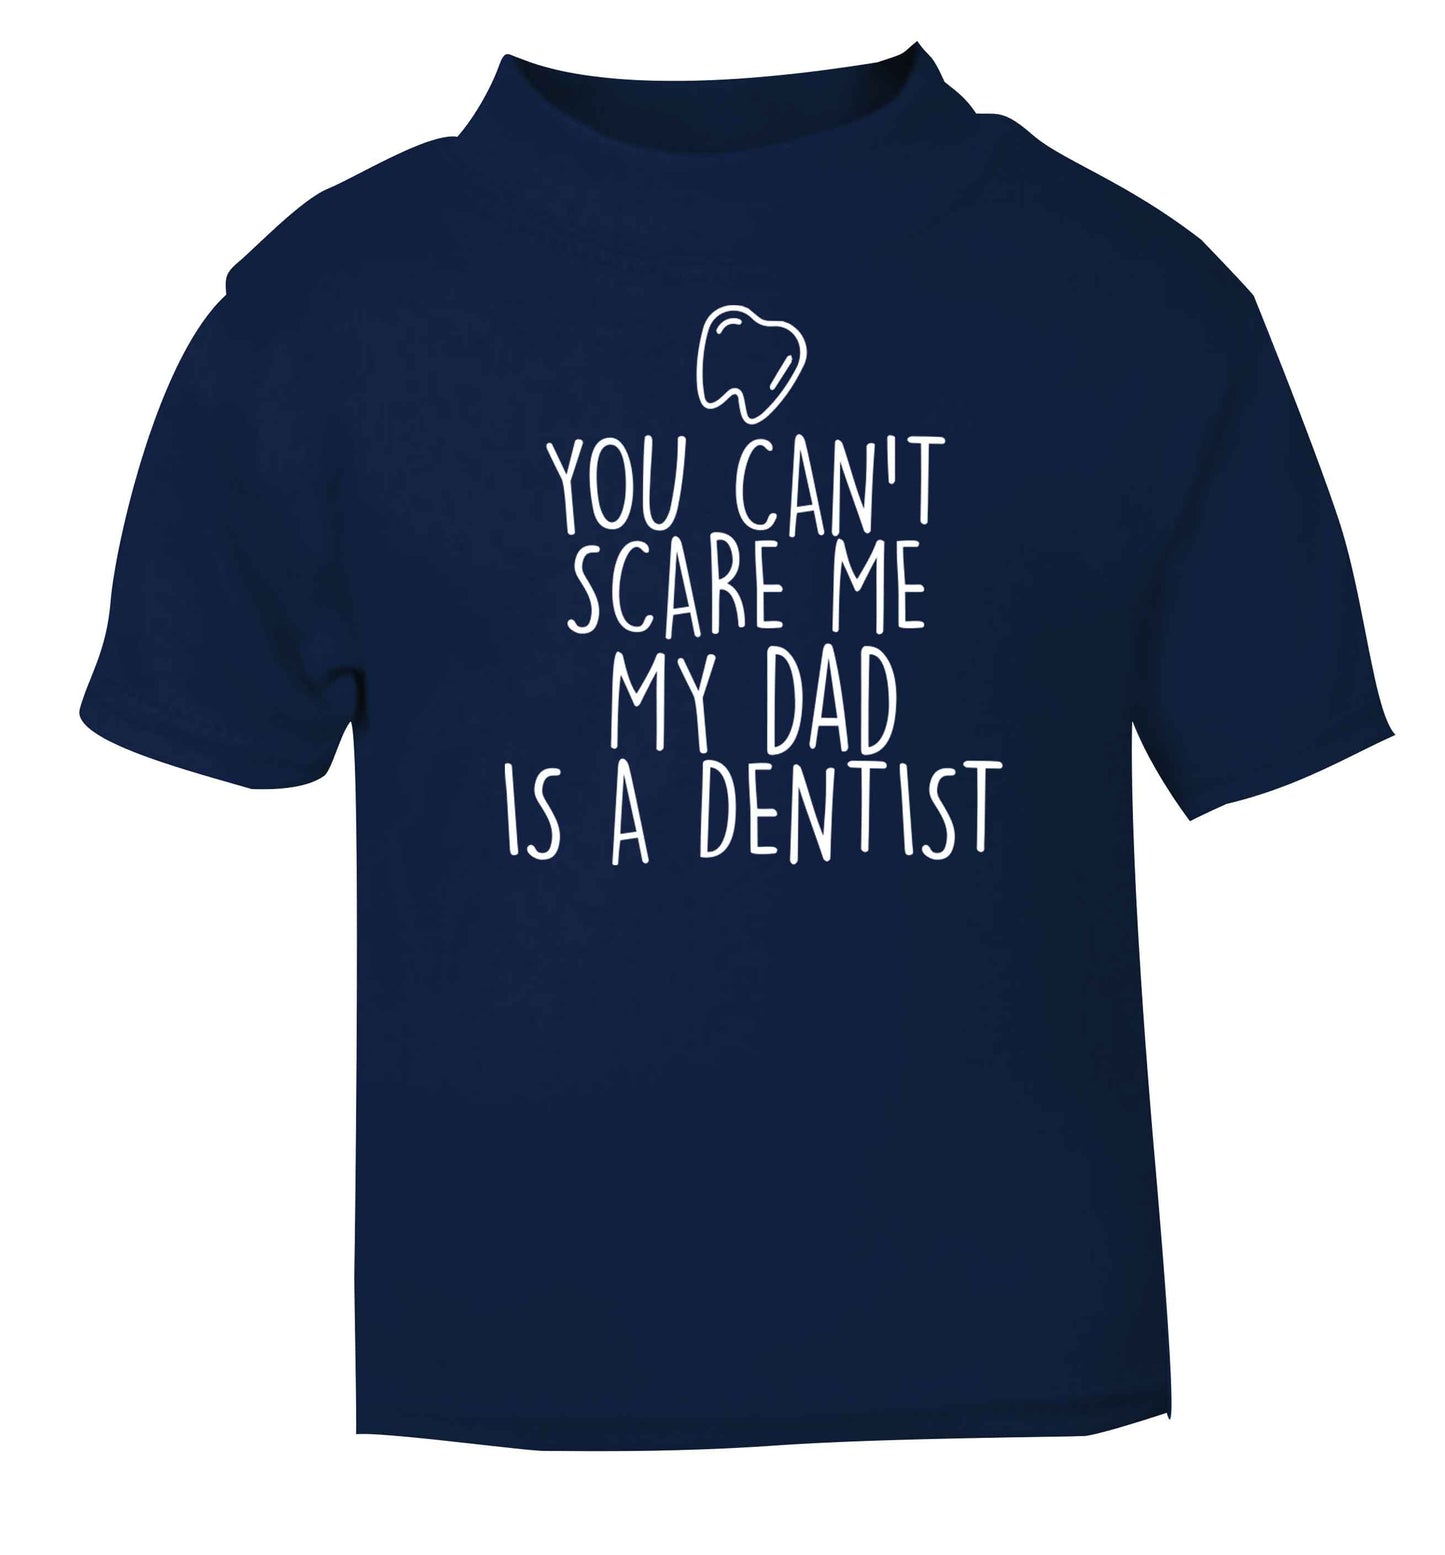 You can't scare me my dad is a dentist navy baby toddler Tshirt 2 Years